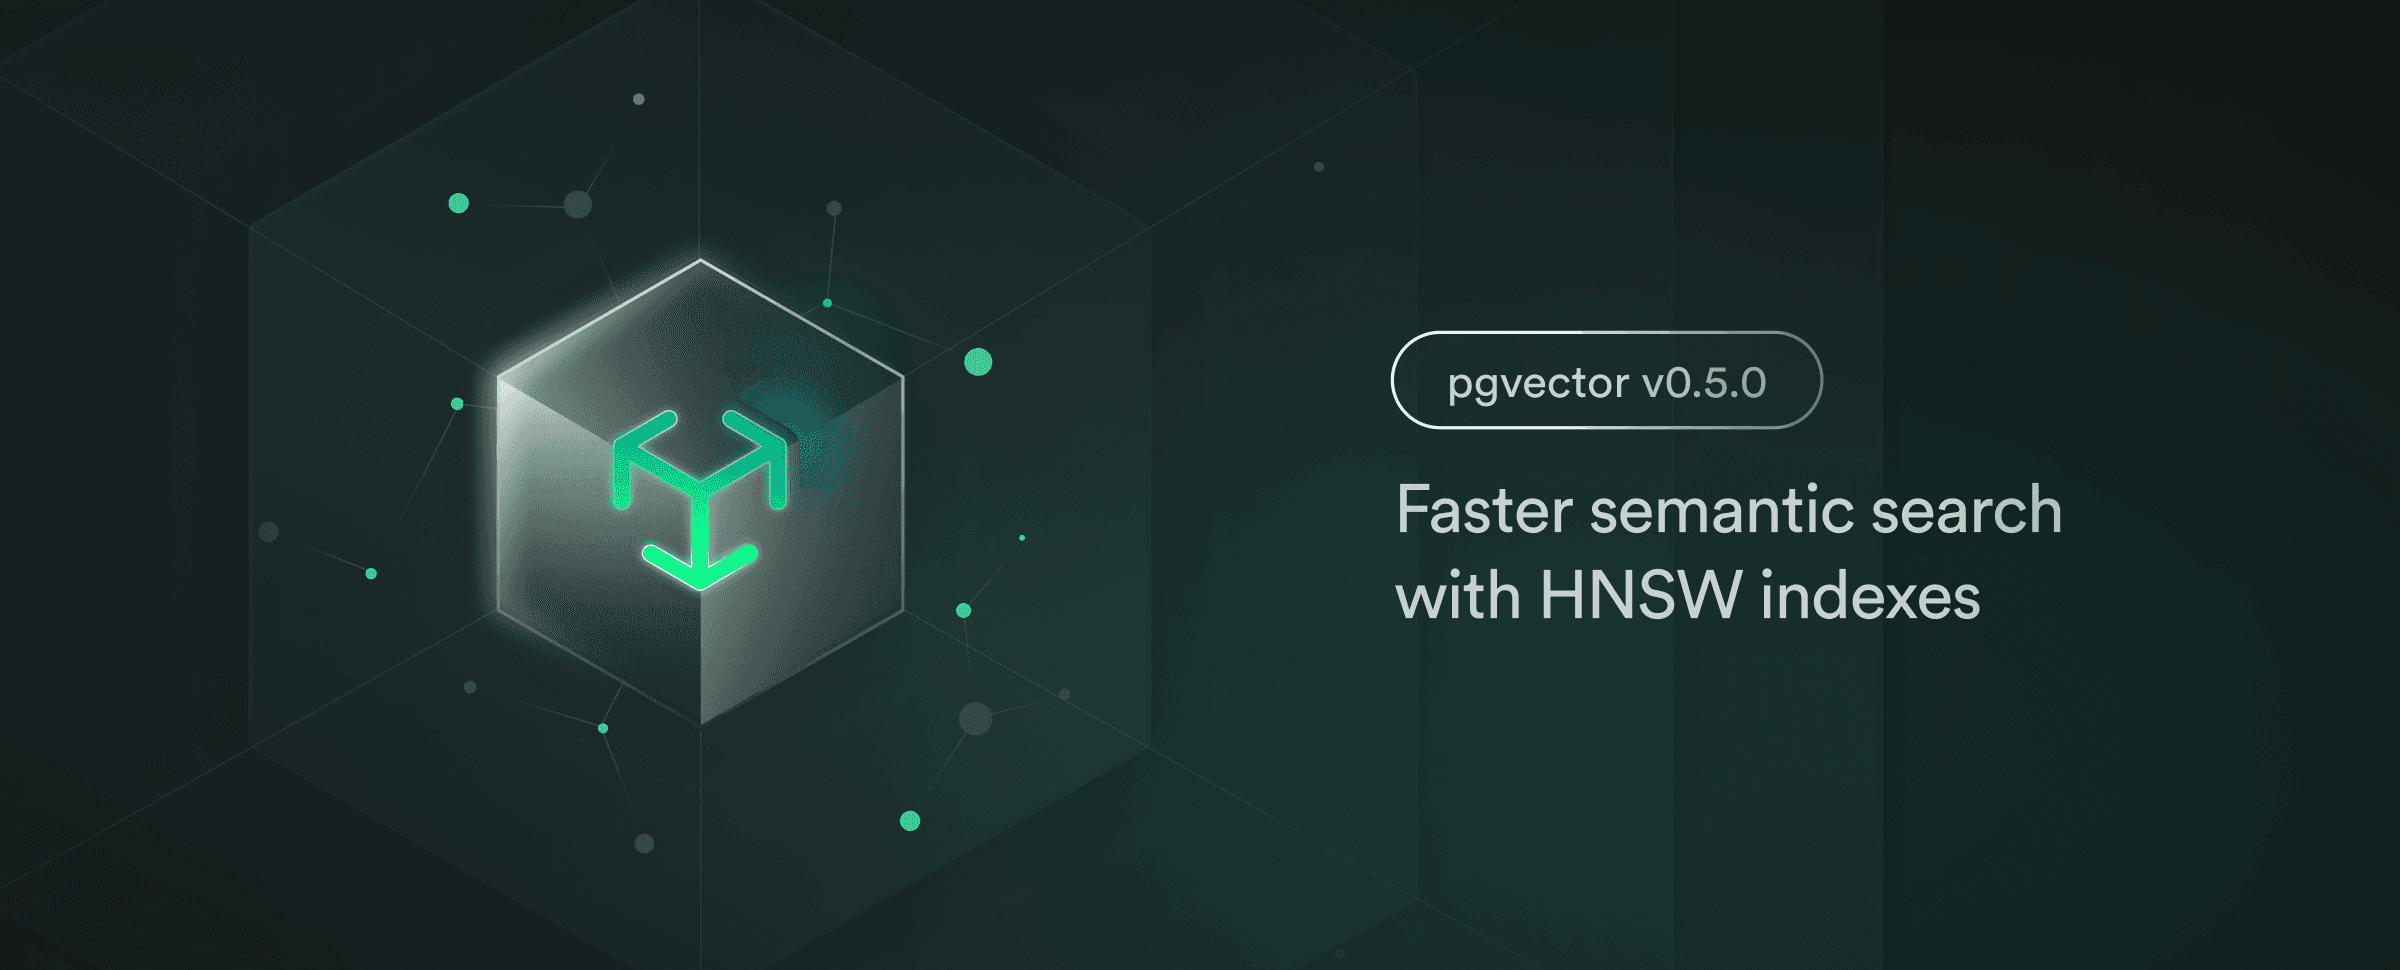 pgvector v0.5.0: Faster semantic search with HNSW indexes